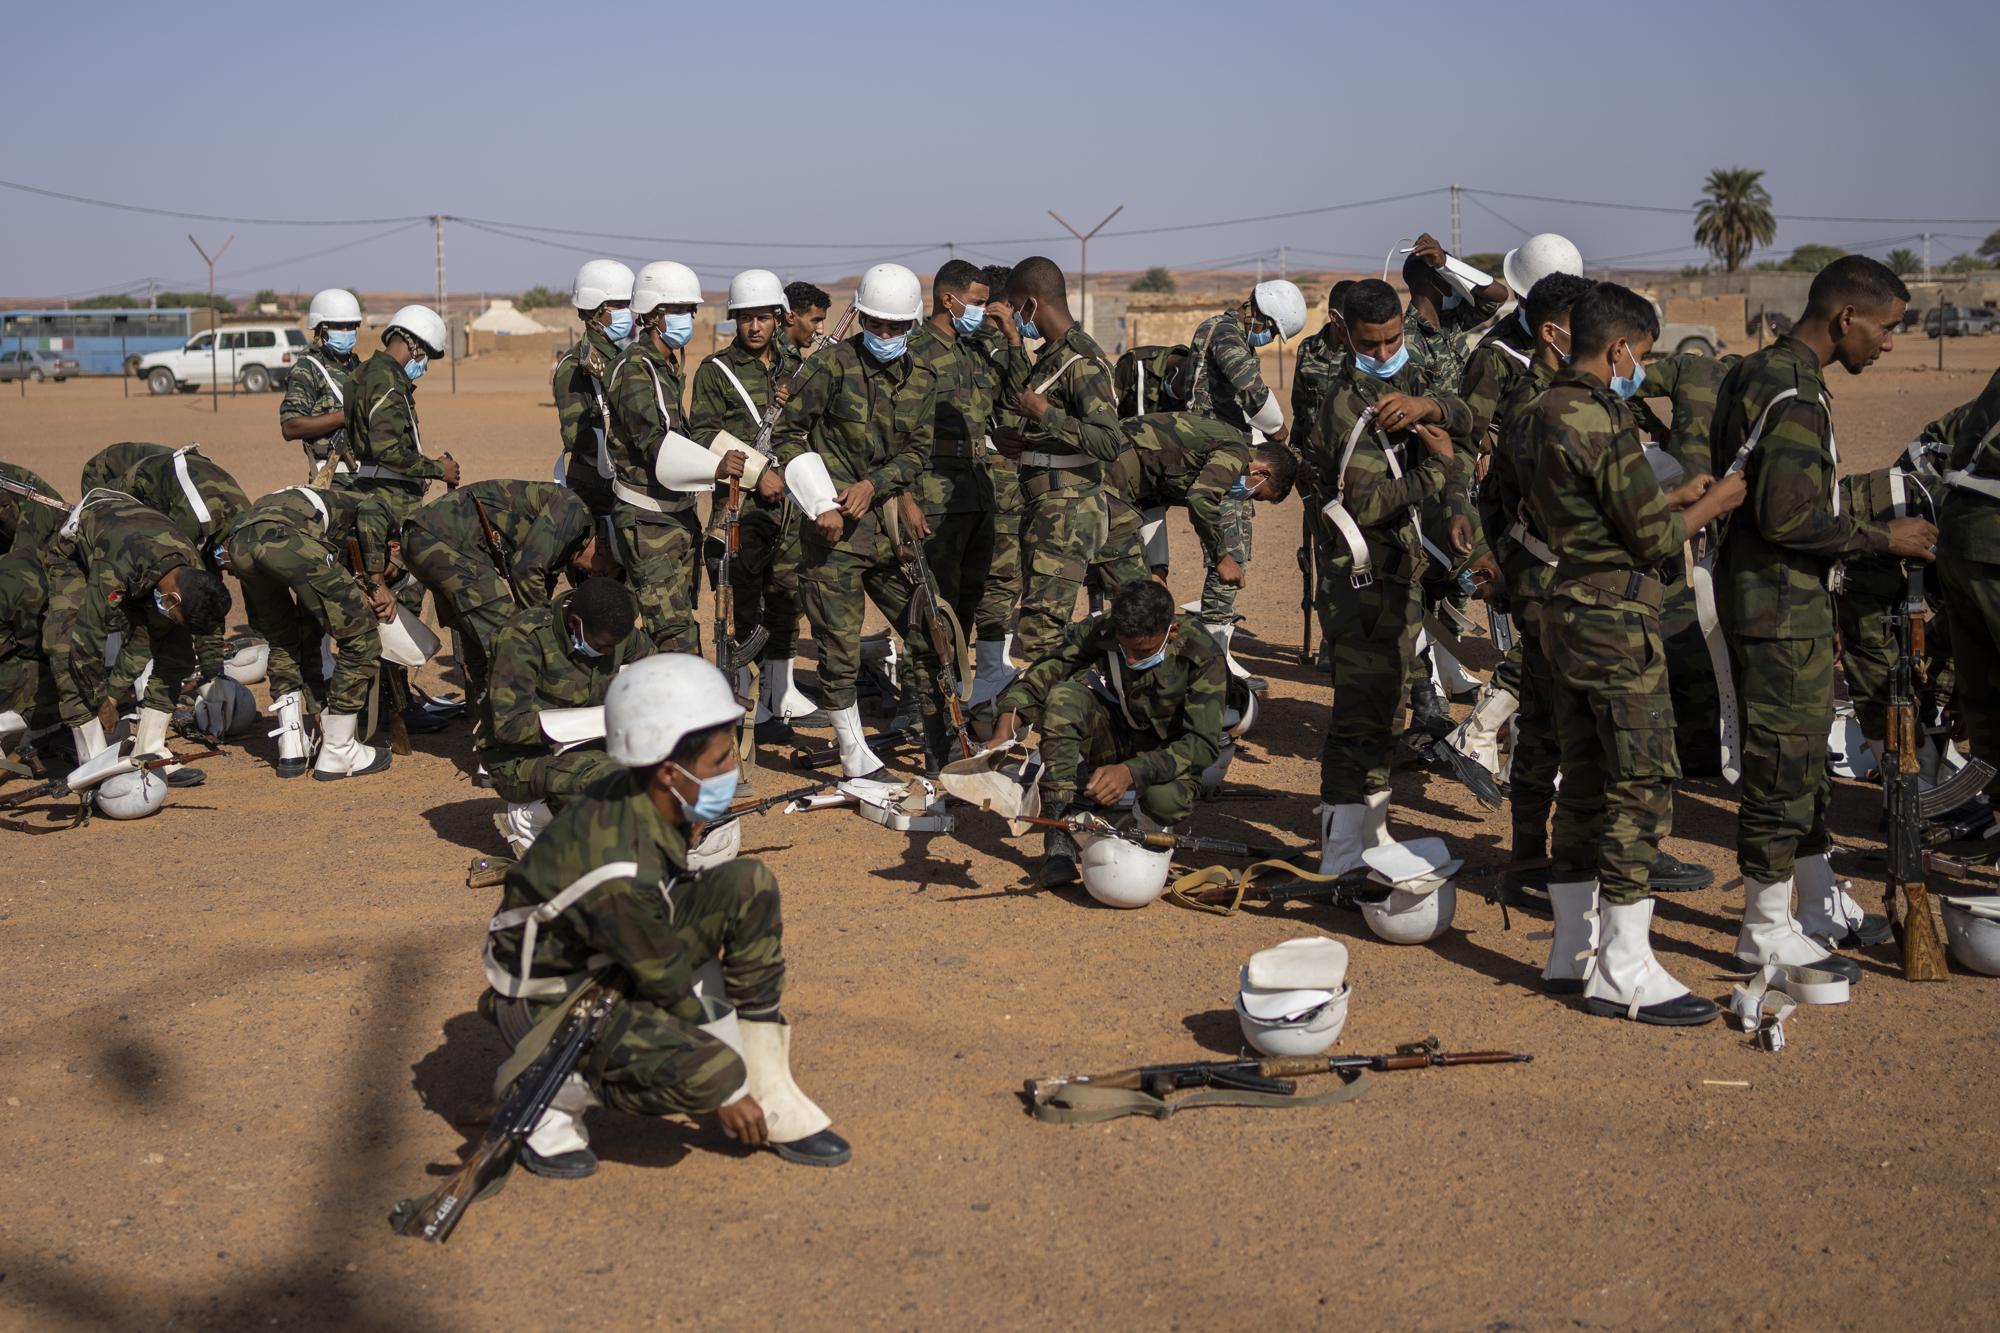 Soldiers from the Polisario Front pack after a National Unity Day event in the Dajla refugee camp, Algeria, Tuesday, Oct. 12, 2021. (AP Photo/Bernat Armangue)